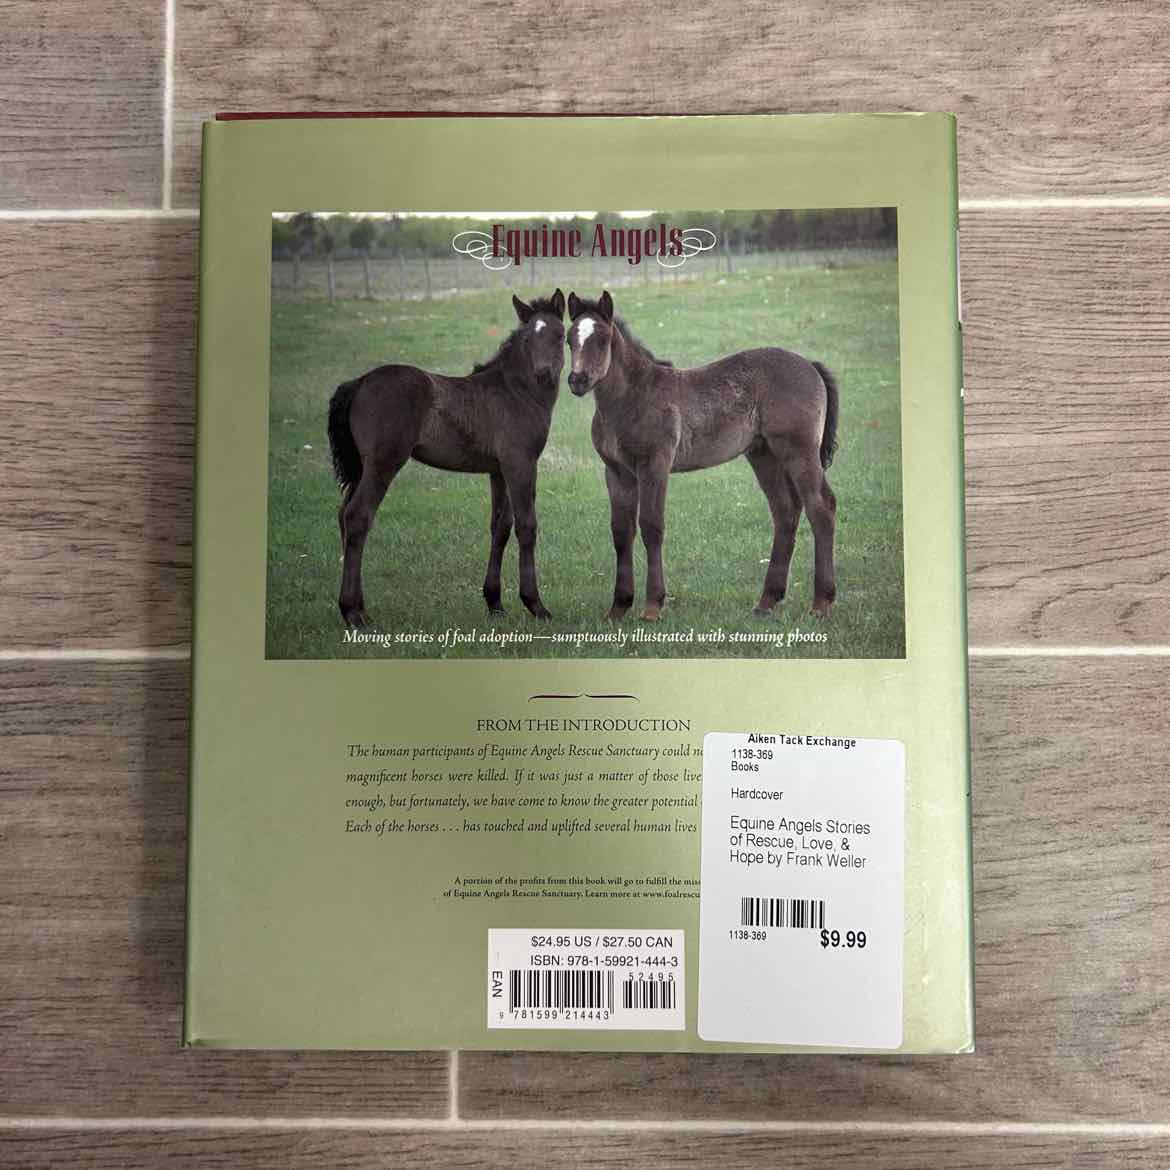 Equine Angels Stories of Rescue, Love, & Hope by Frank Weller